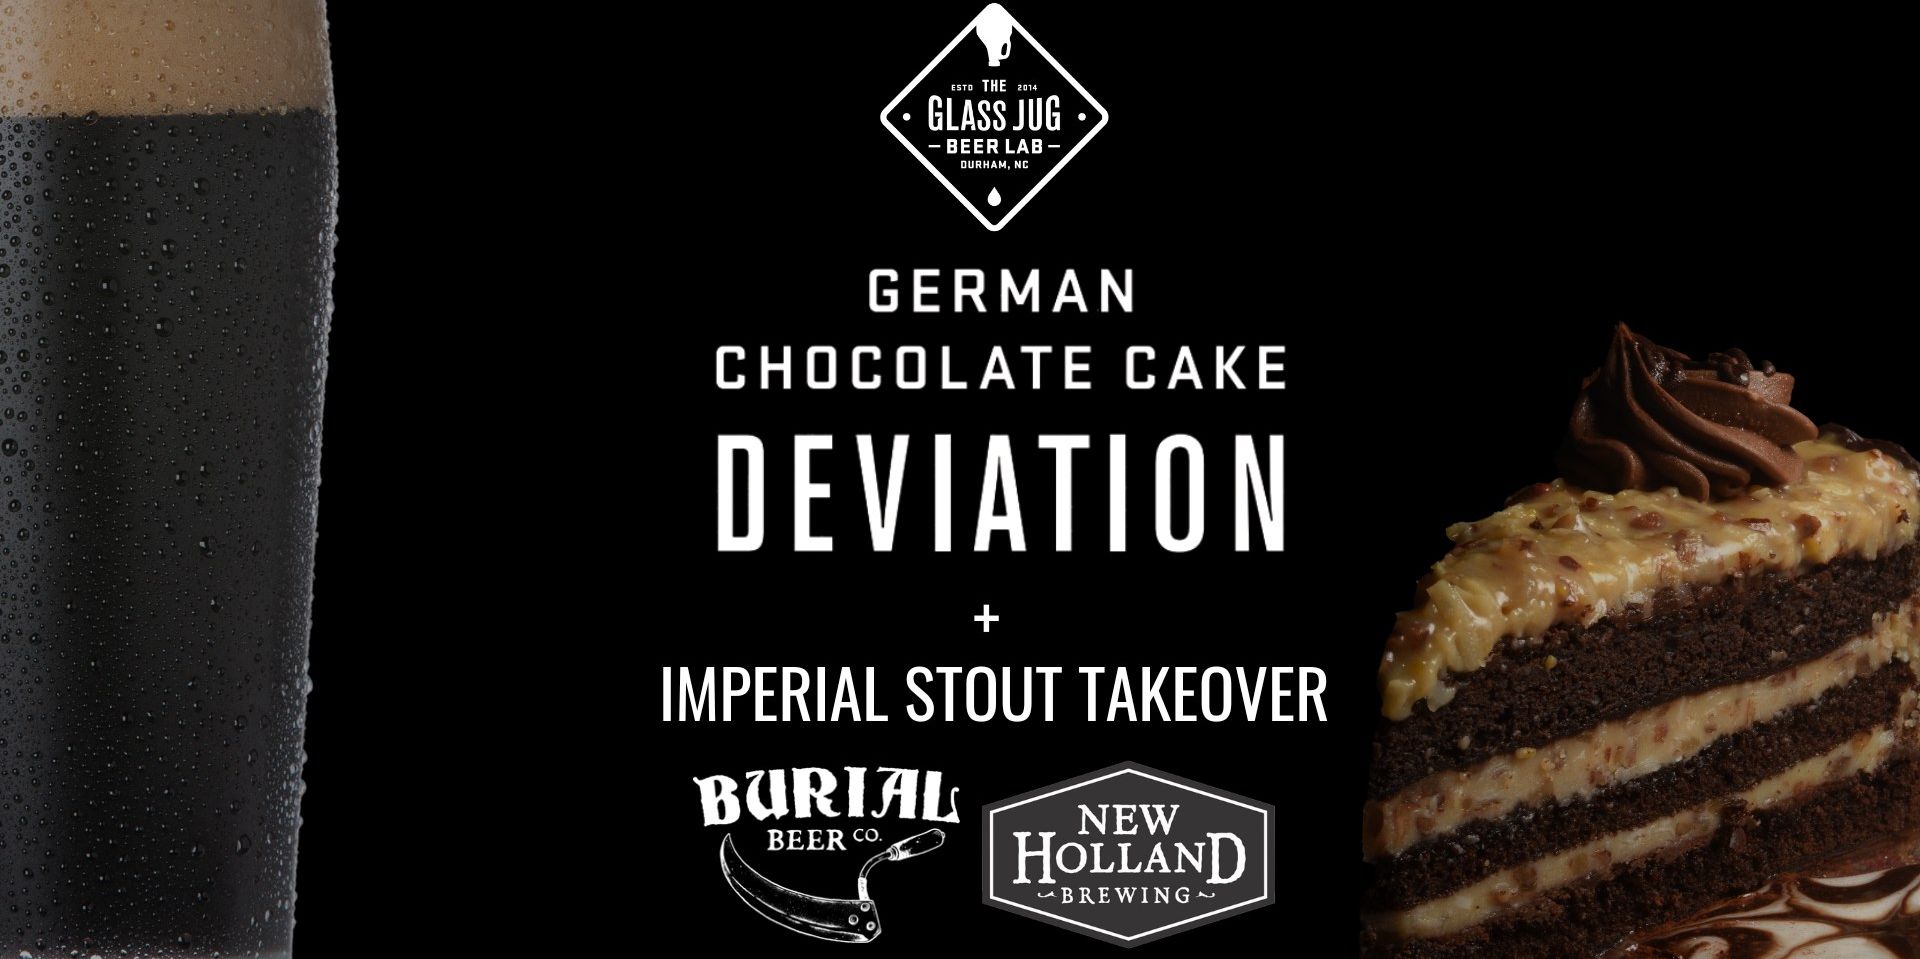 German Chocolate Cake Deviation + Imperial Stout Takeover promotional image